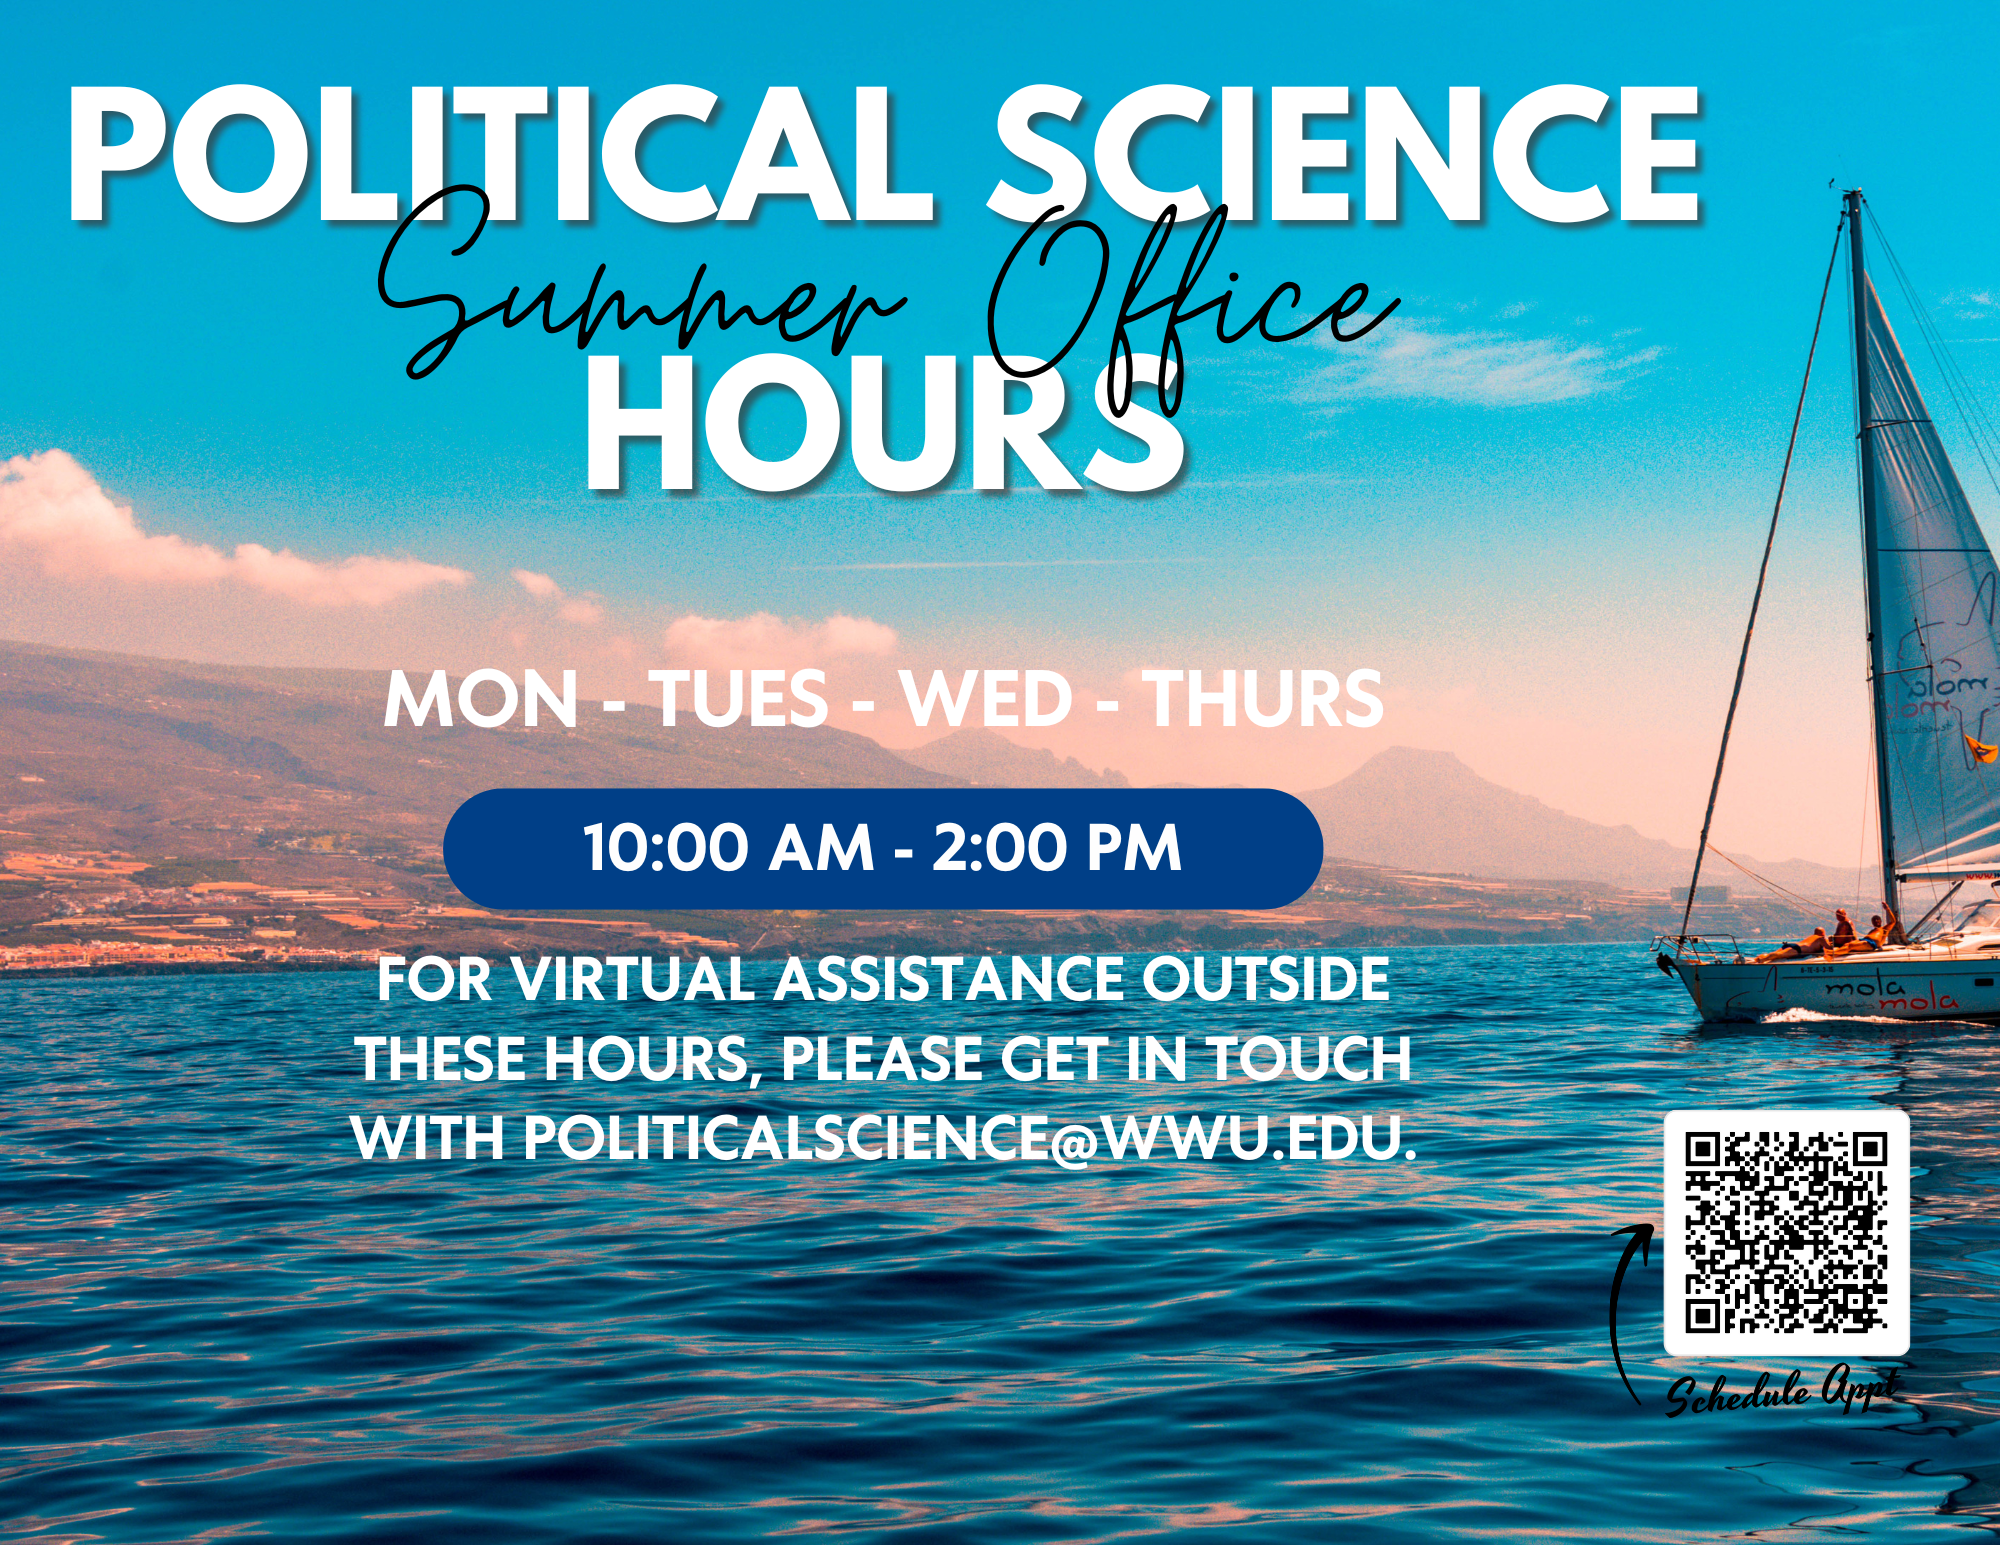 Political Science Summer Office Hours - Mon-Thur 10-2